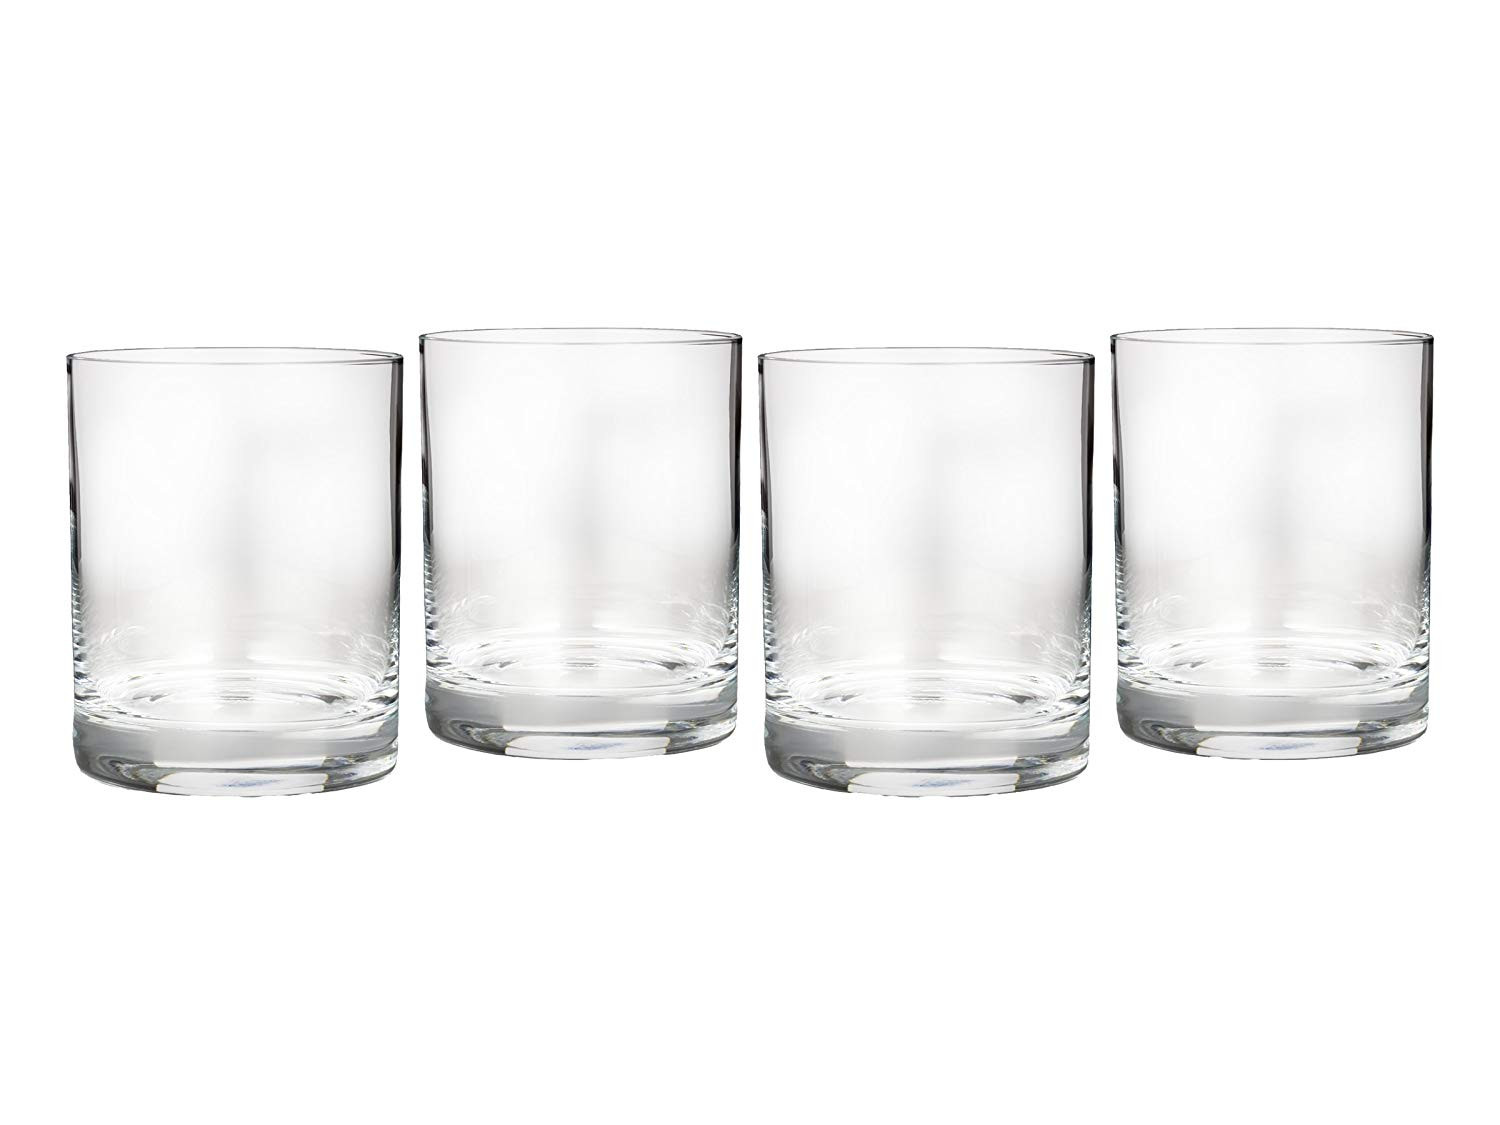 11 Nice Marquis by Waterford 9 Markham Vase 2024 free download marquis by waterford 9 markham vase of amazon com vintage dof 9 oz set of 4 old fashioned glasses throughout amazon com vintage dof 9 oz set of 4 old fashioned glasses kitchen dining